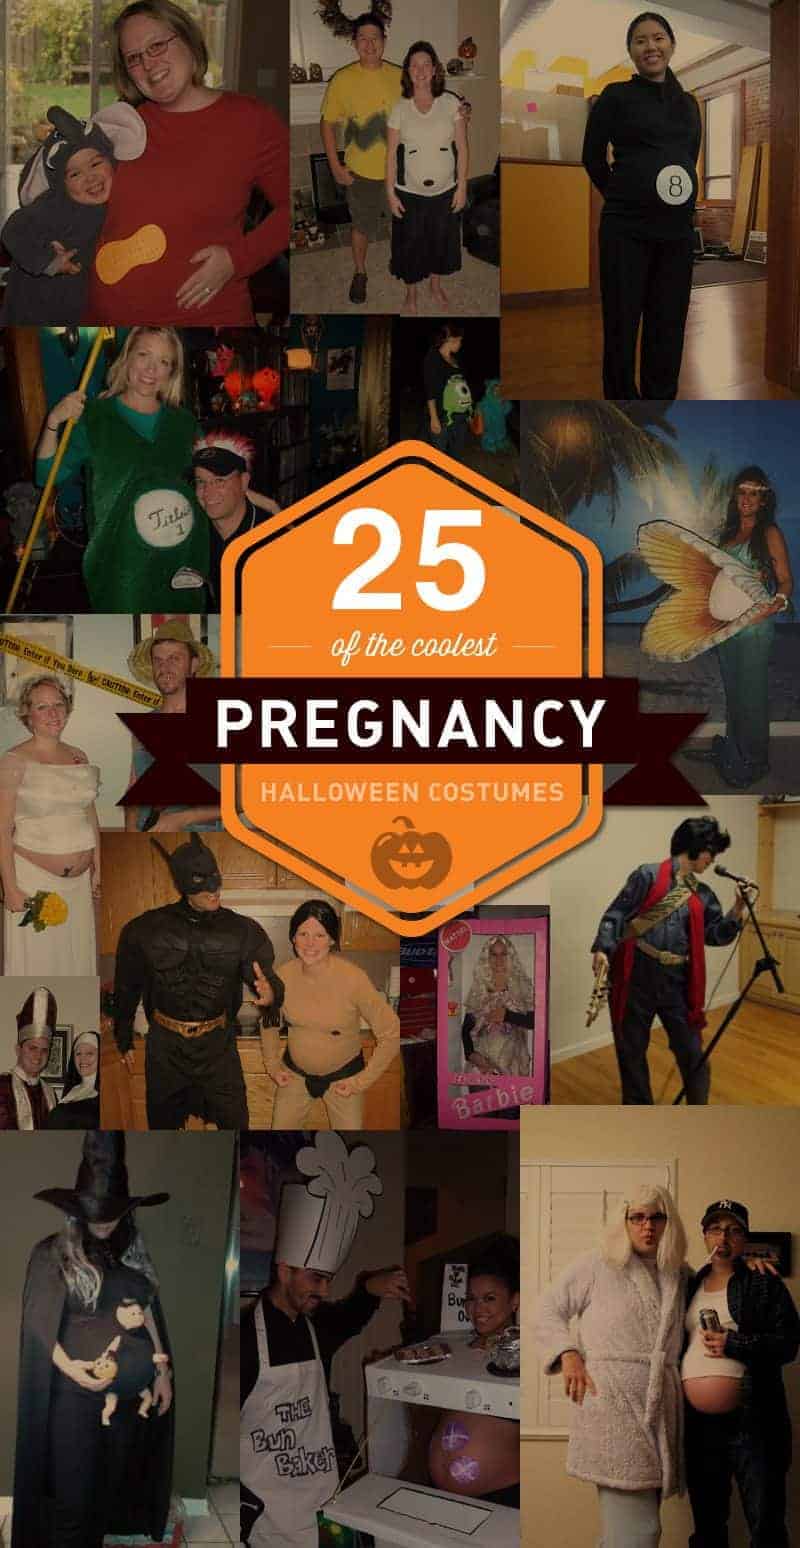 Pregnant this Halloween? Click through for great DIY ideas for maternity Halloween costumes.